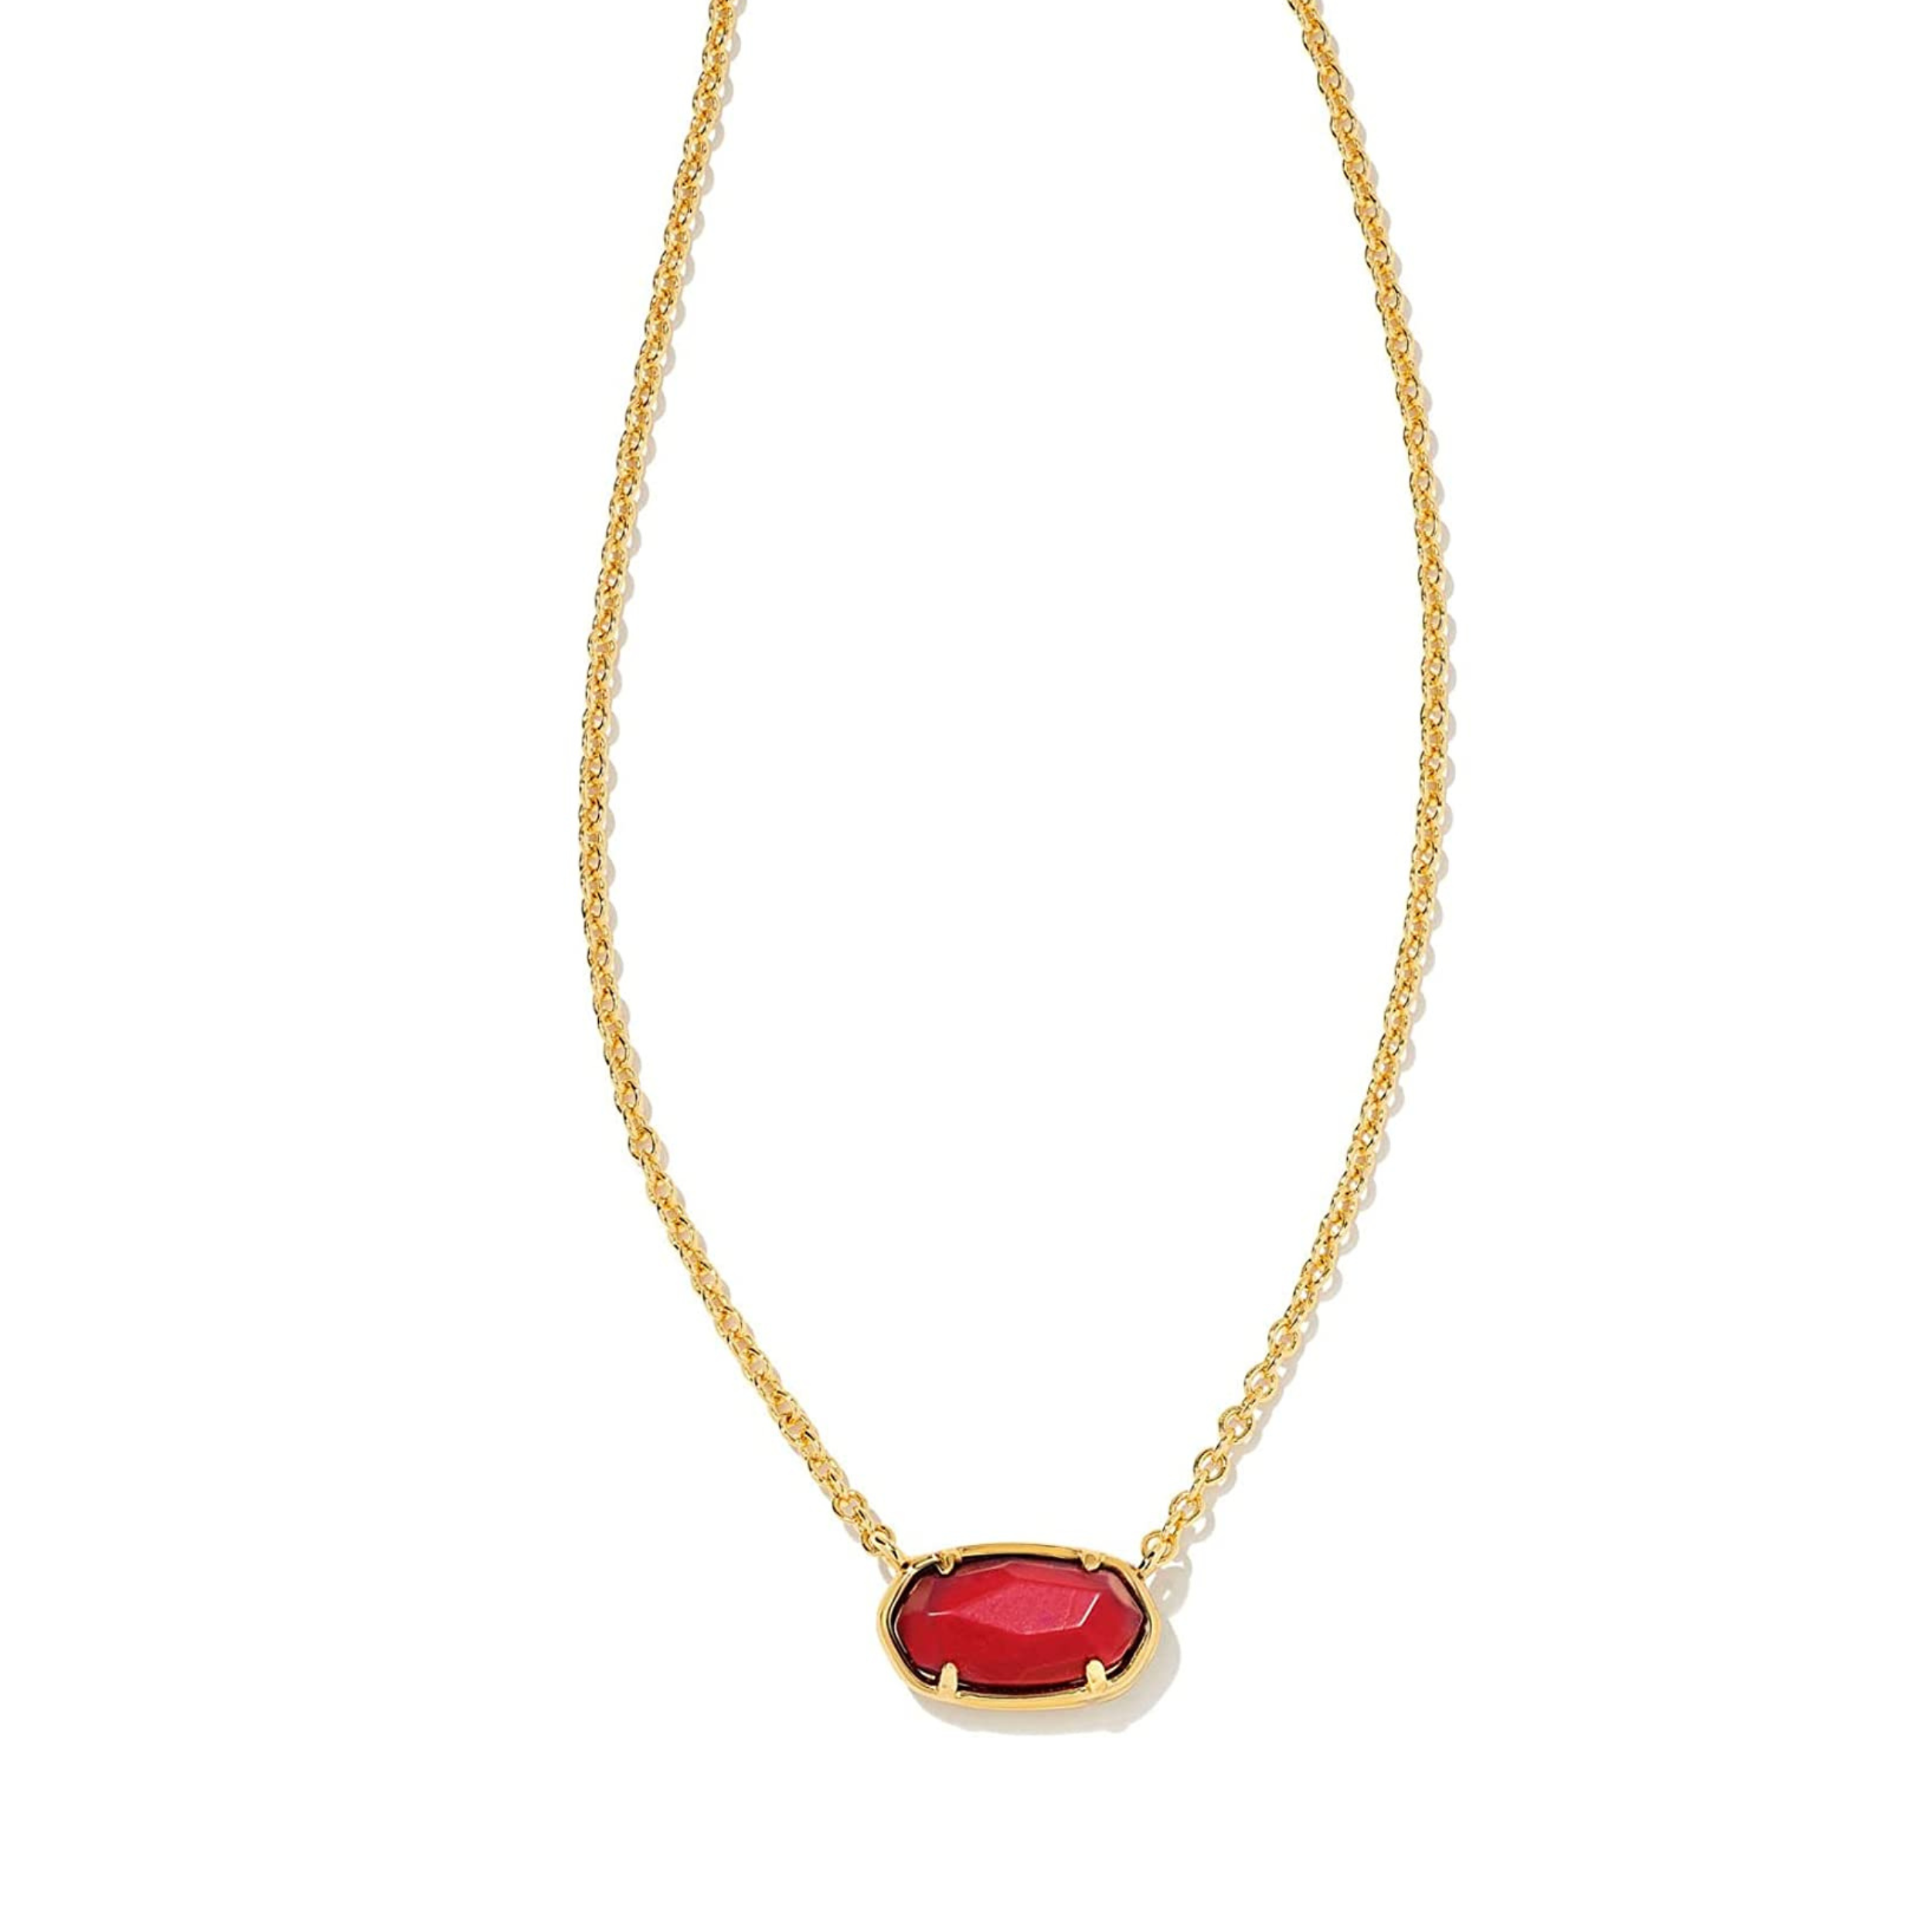 Gold chain necklace with maroon magnesite pendant, pictured on a white background.